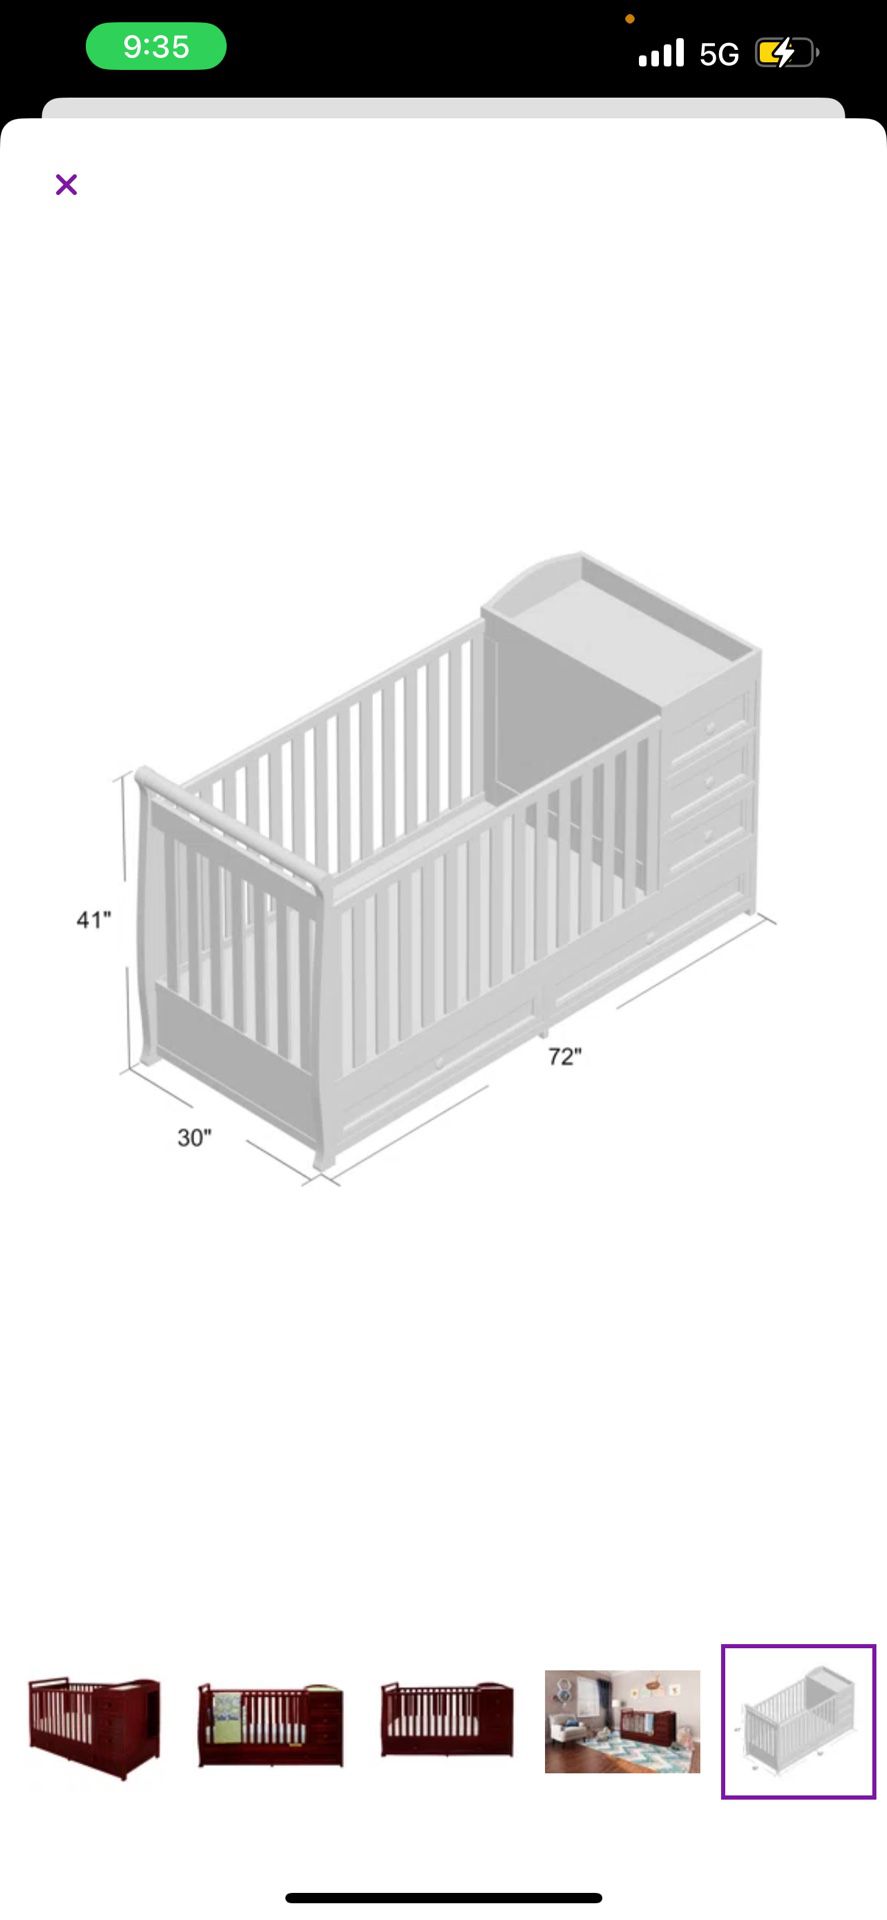 Brnaba 2 In 1 Convertible Crib And Changer 